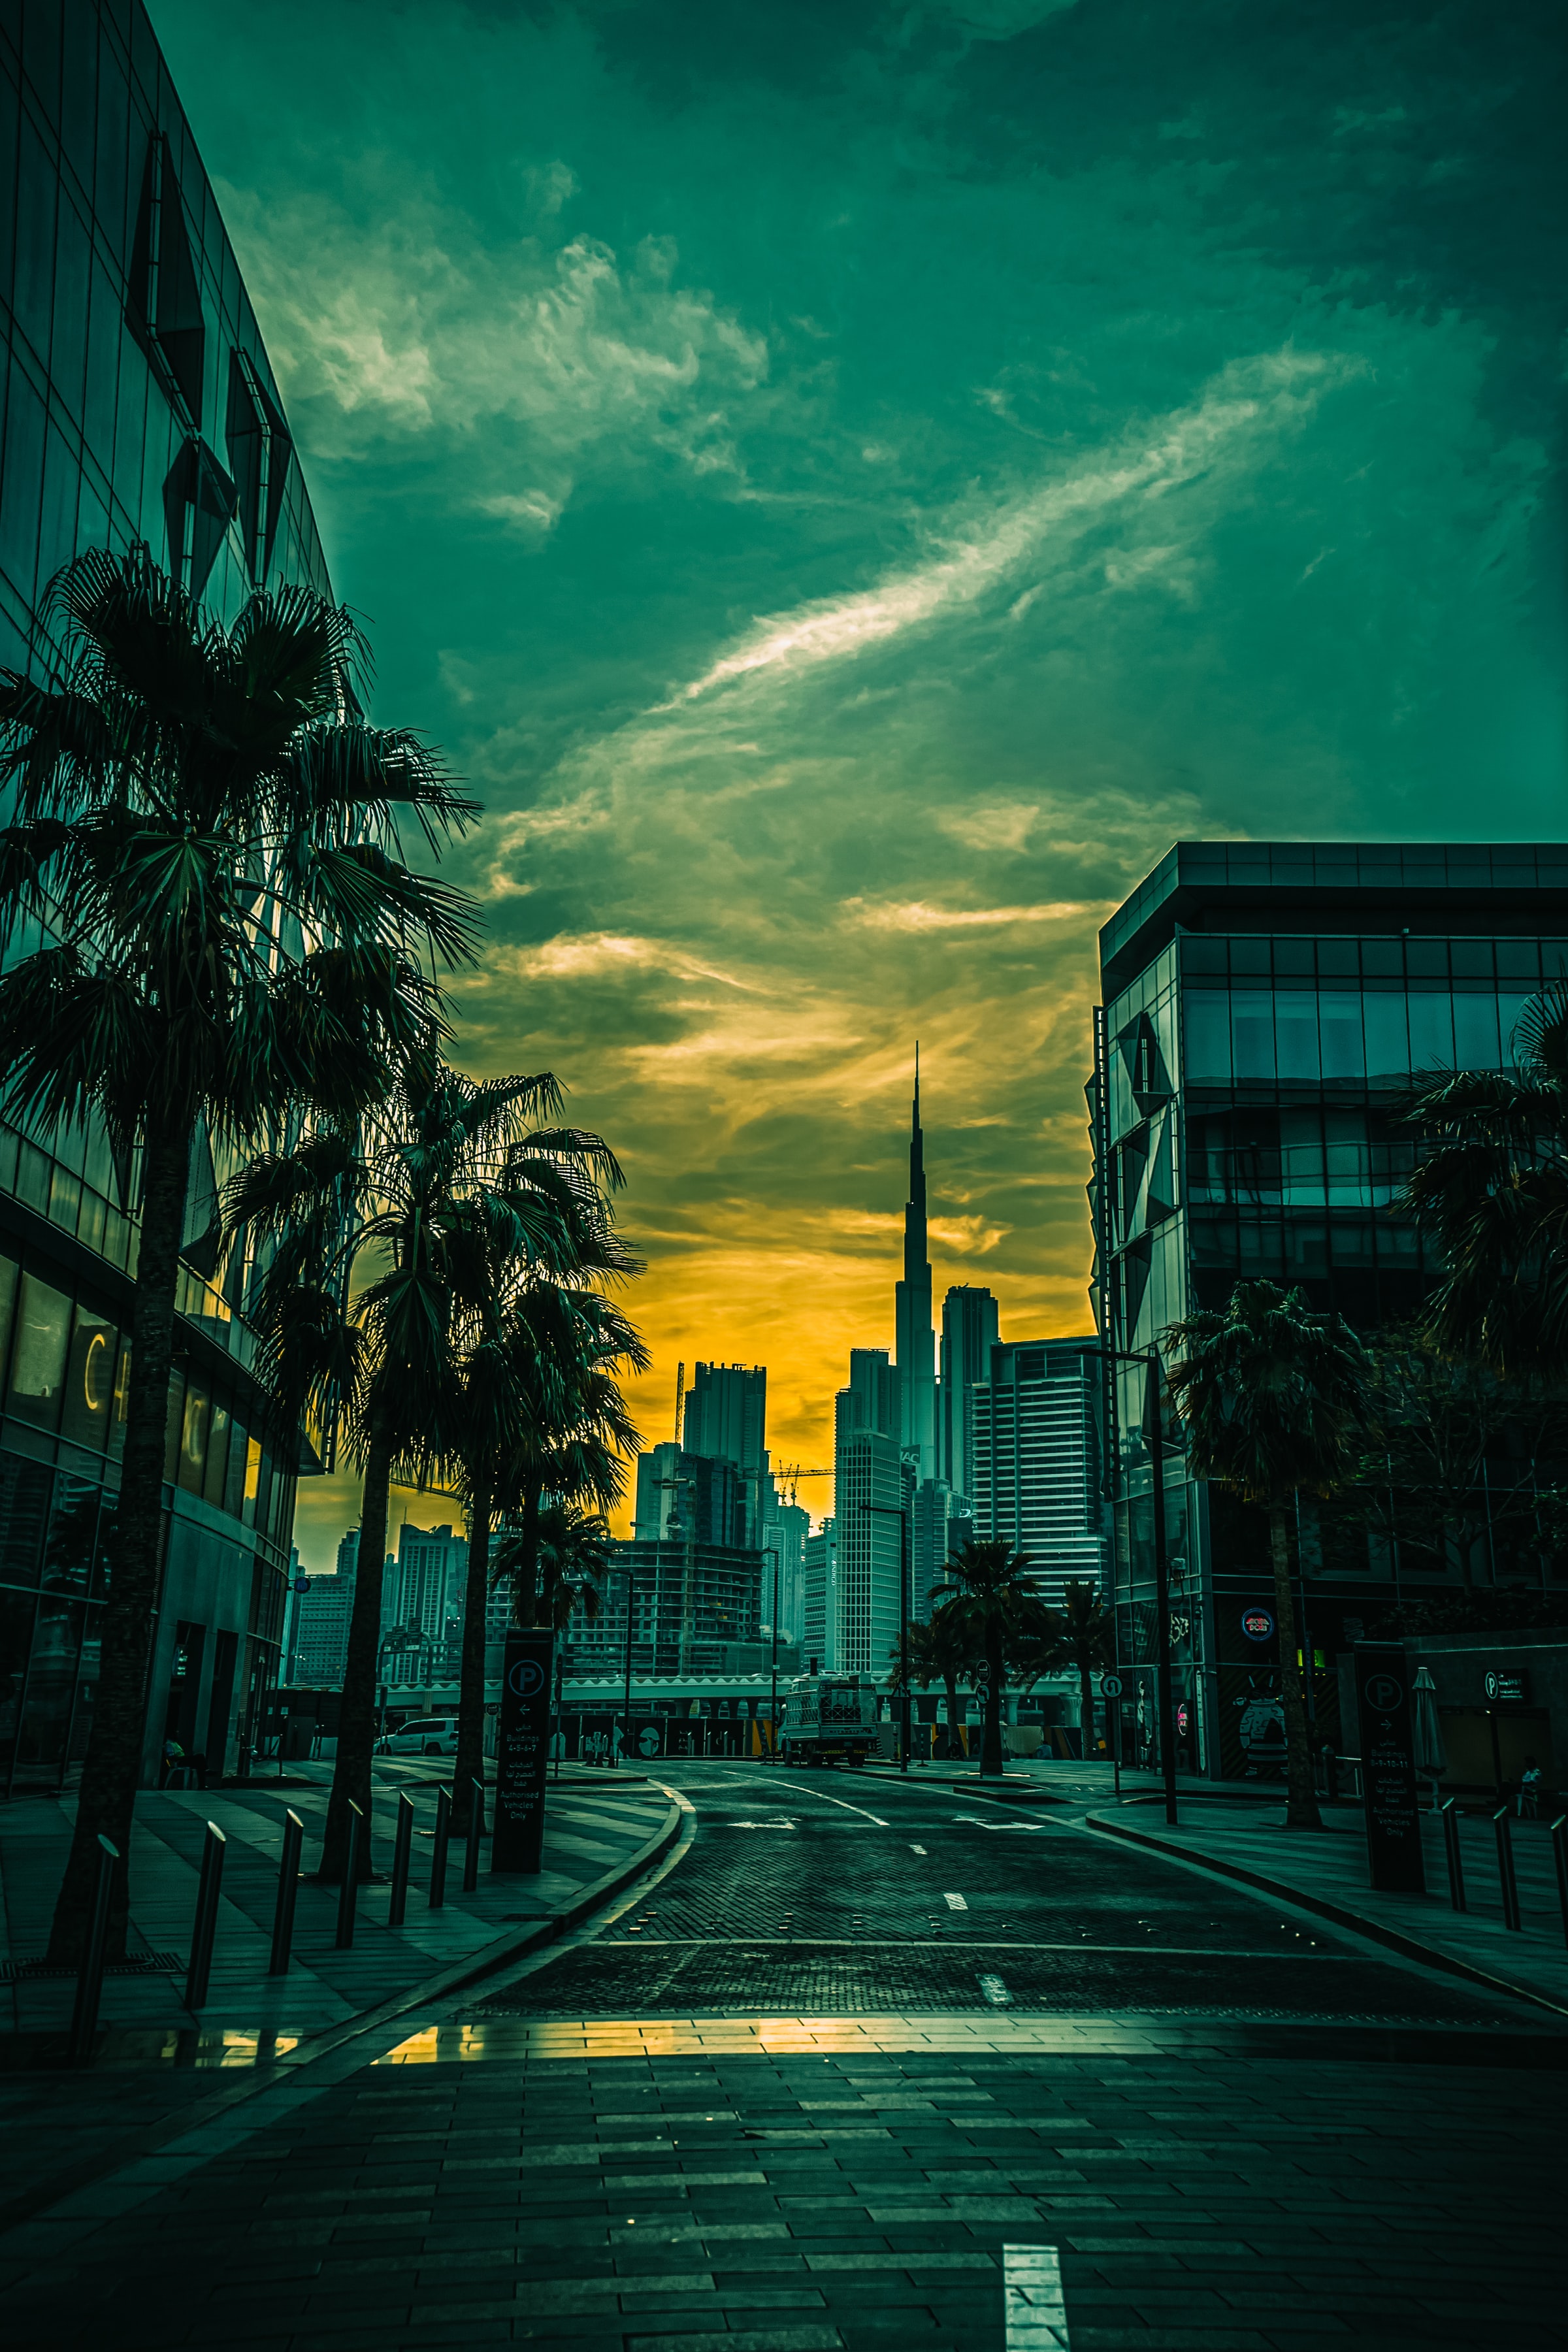 cities, architecture, palms, city, building iphone wallpaper